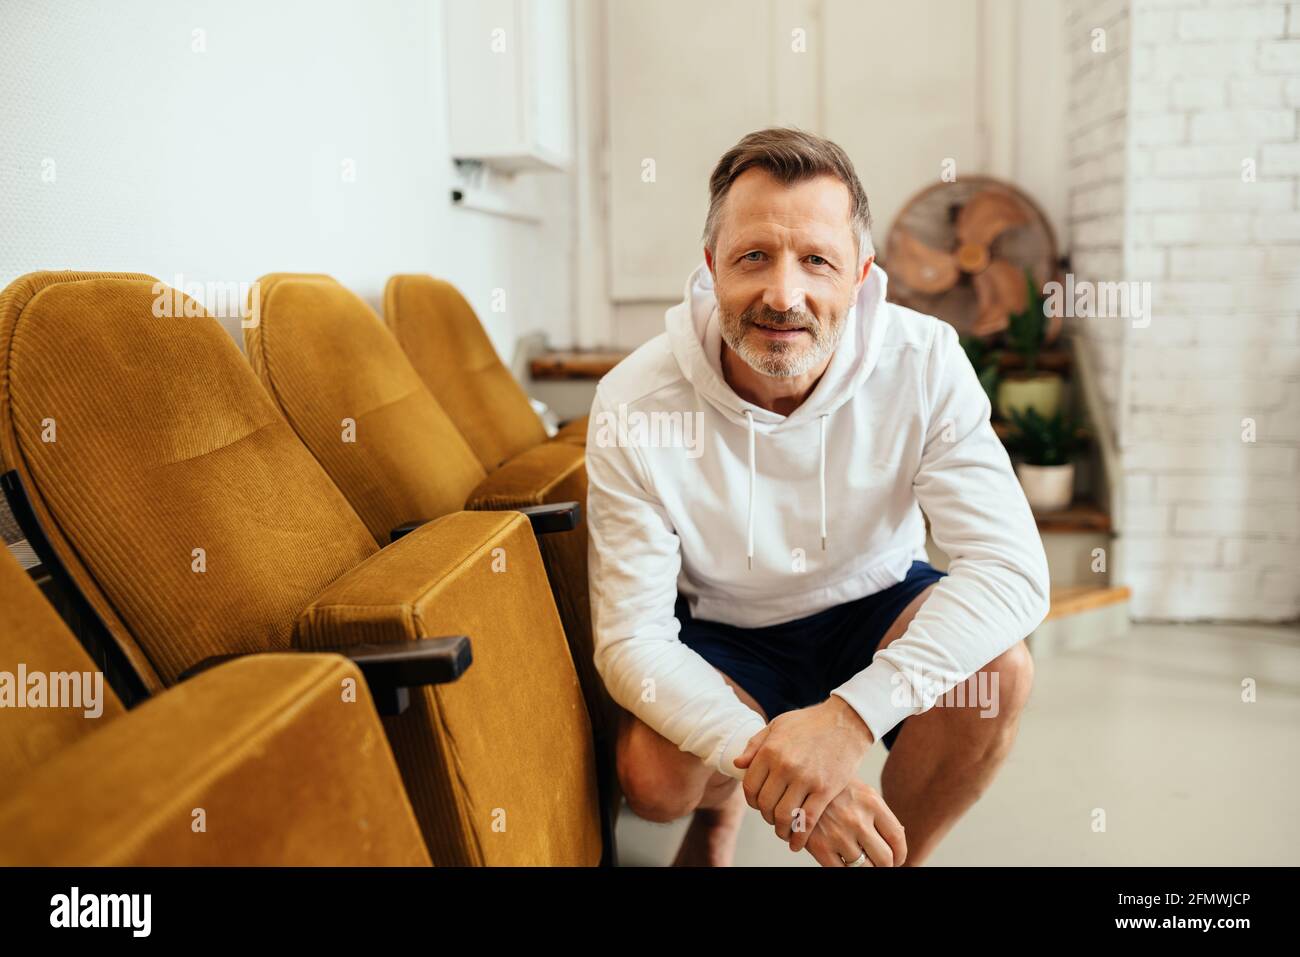 Middle-aged man in shorts and a white hoodie kneeling staring at the camera with an expectant attentive expression as though listening Stock Photo